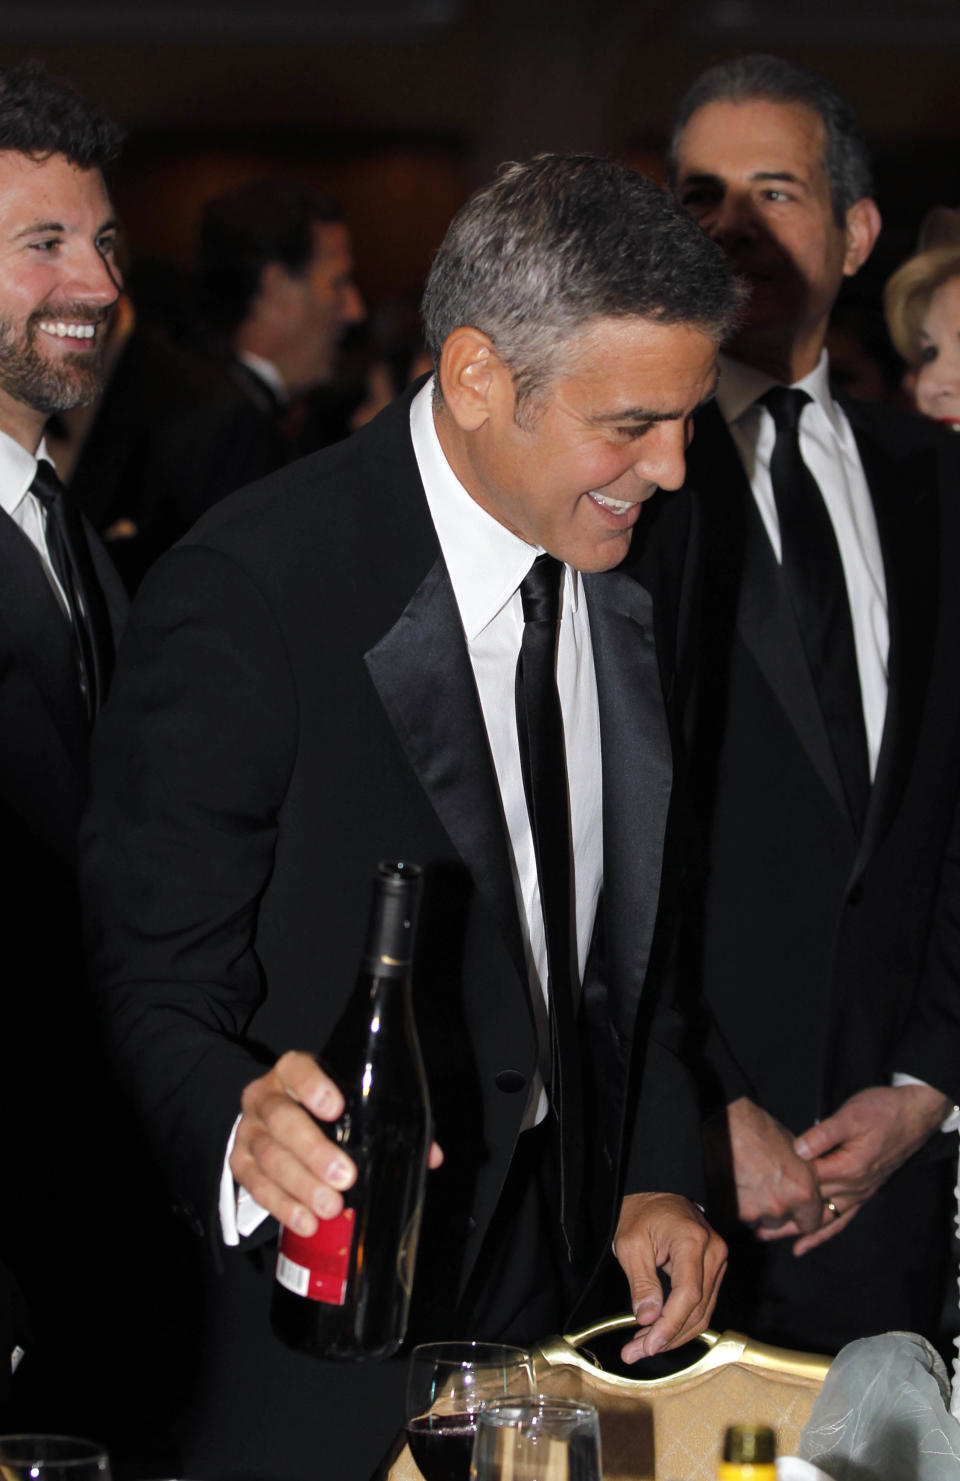 George Clooney attends the White House Correspondents' Association Dinner headlined by late-night comic Jimmy Kimmel, Saturday, April 28, 2012 in Washington. (AP Photo/Haraz N. Ghanbari)